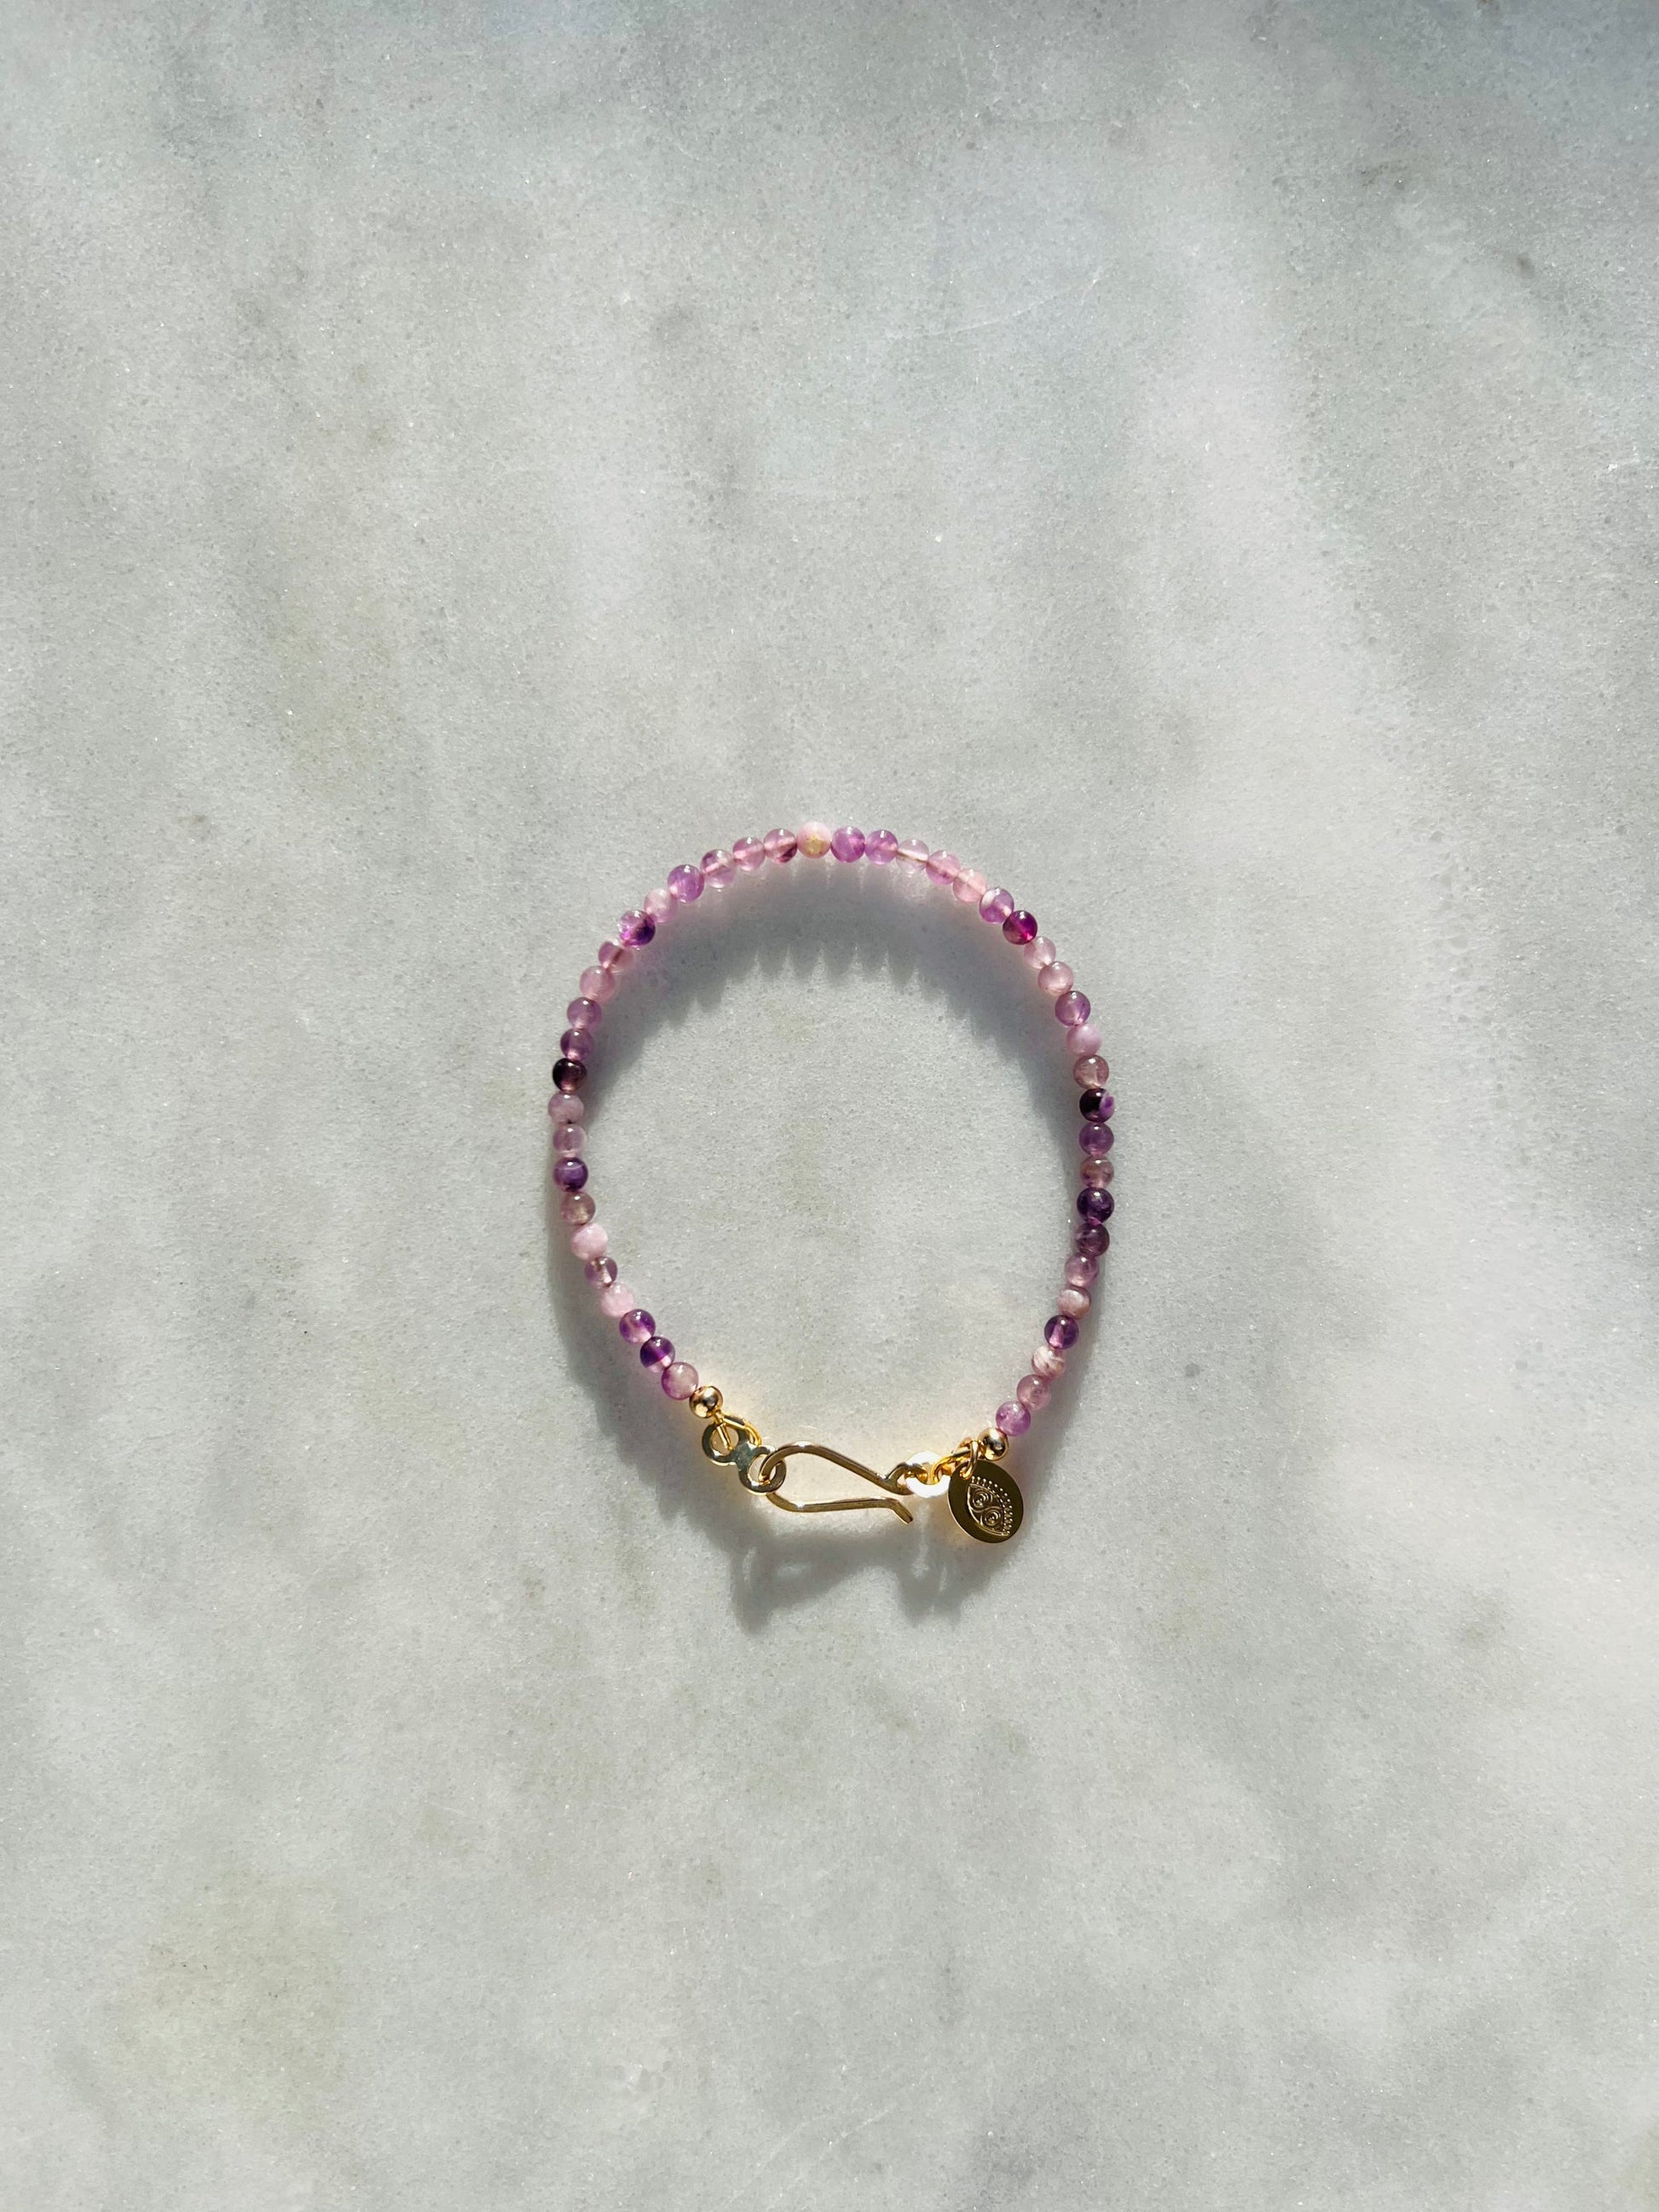 Originally named after its pointy growth pattern, purple calcite beads are smoothed out to rid your aura of stagnancy.  From Punkwasp's Power Collection - one of a kind pieces designed to energetically align you with your highest self.